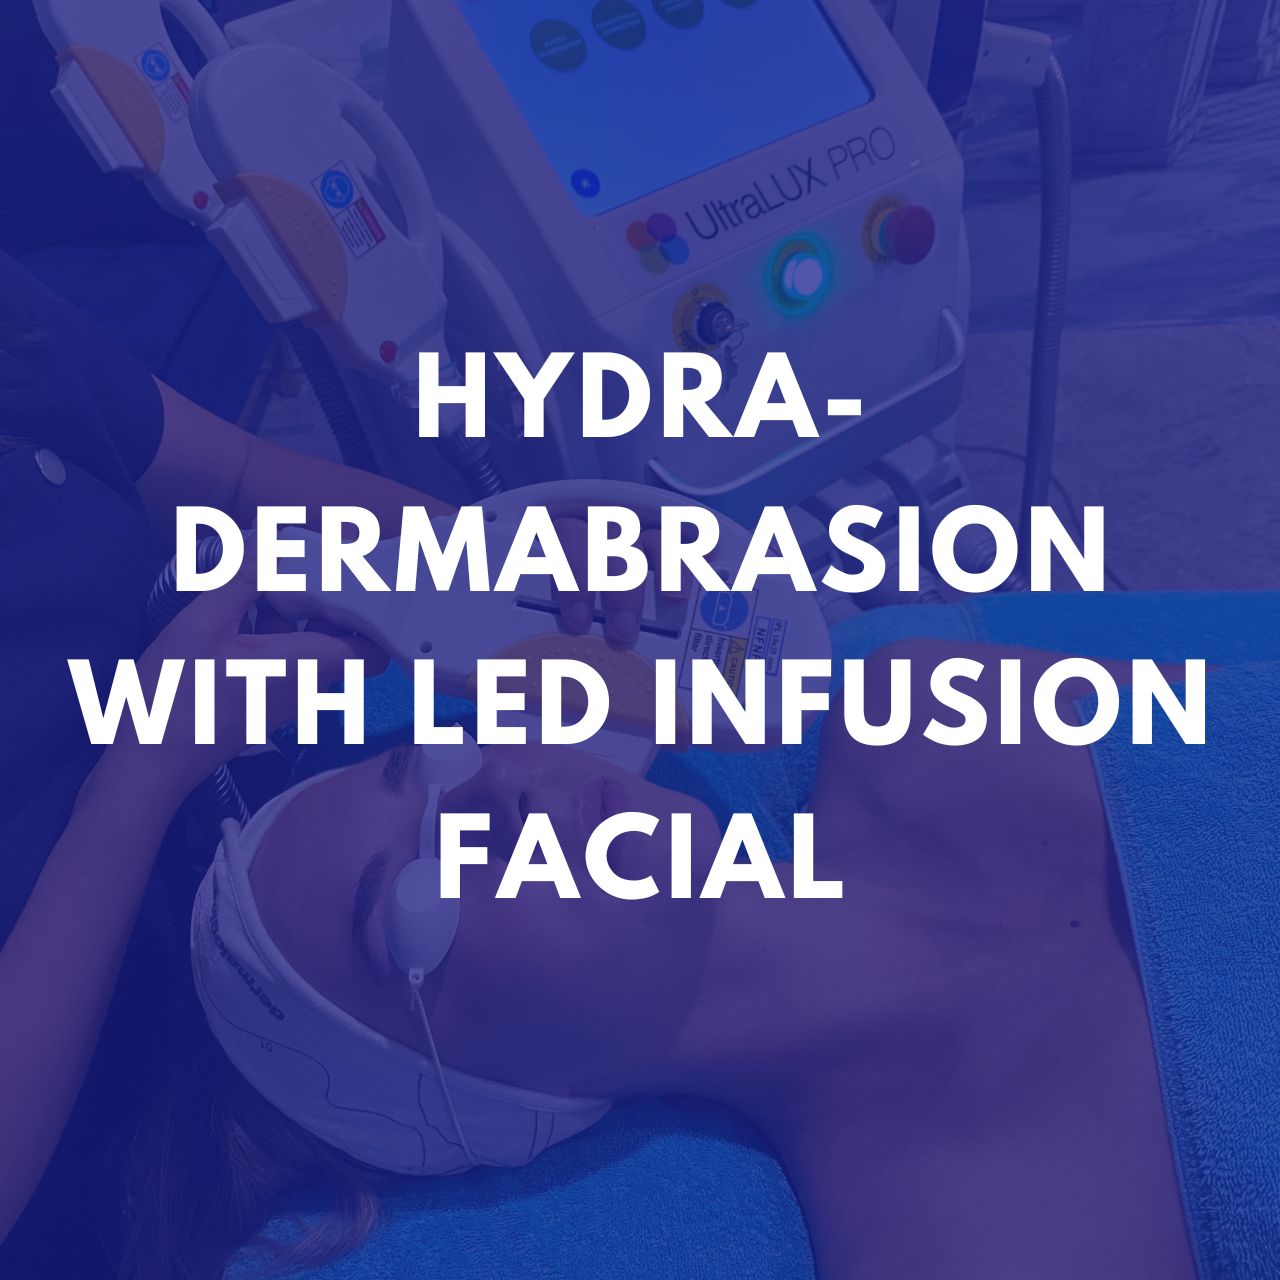 Hydra-Dermabrasion with LED Infusion Facial